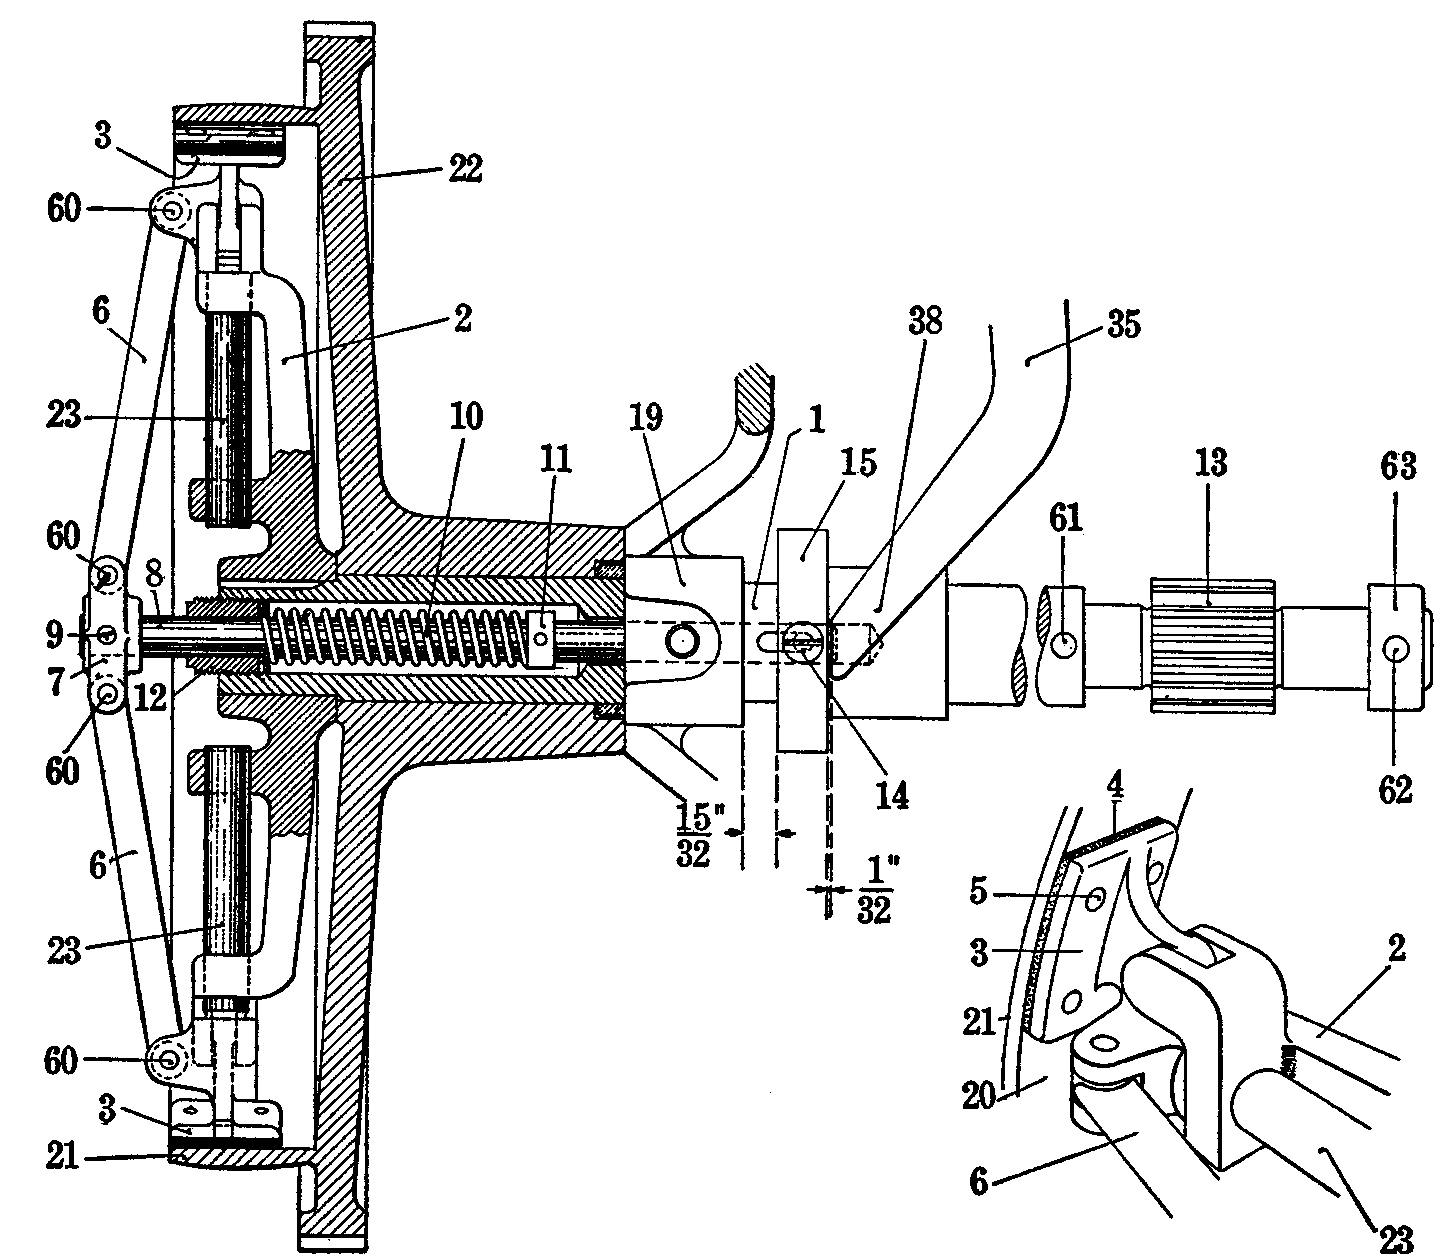 Line drawing of the clutch end of the driving shaft.